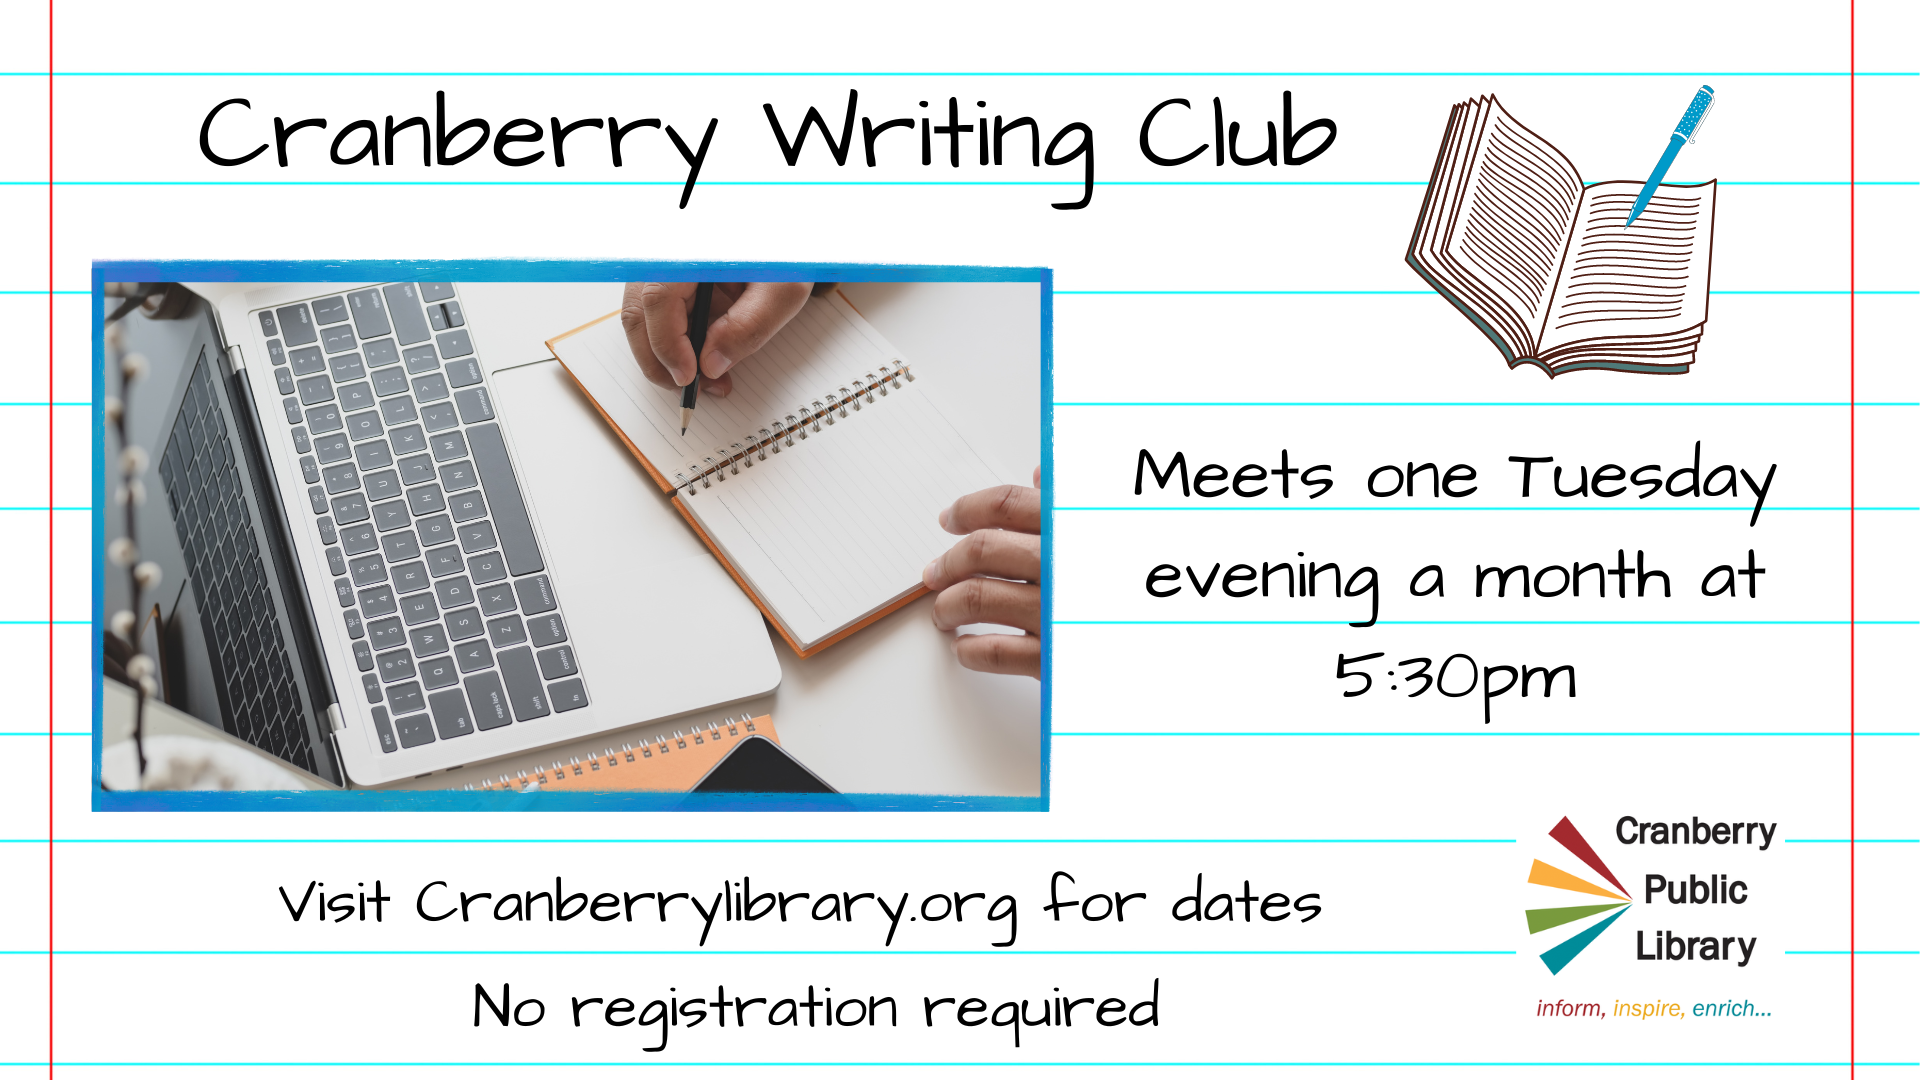 Flyer for Cranberry Writing Club